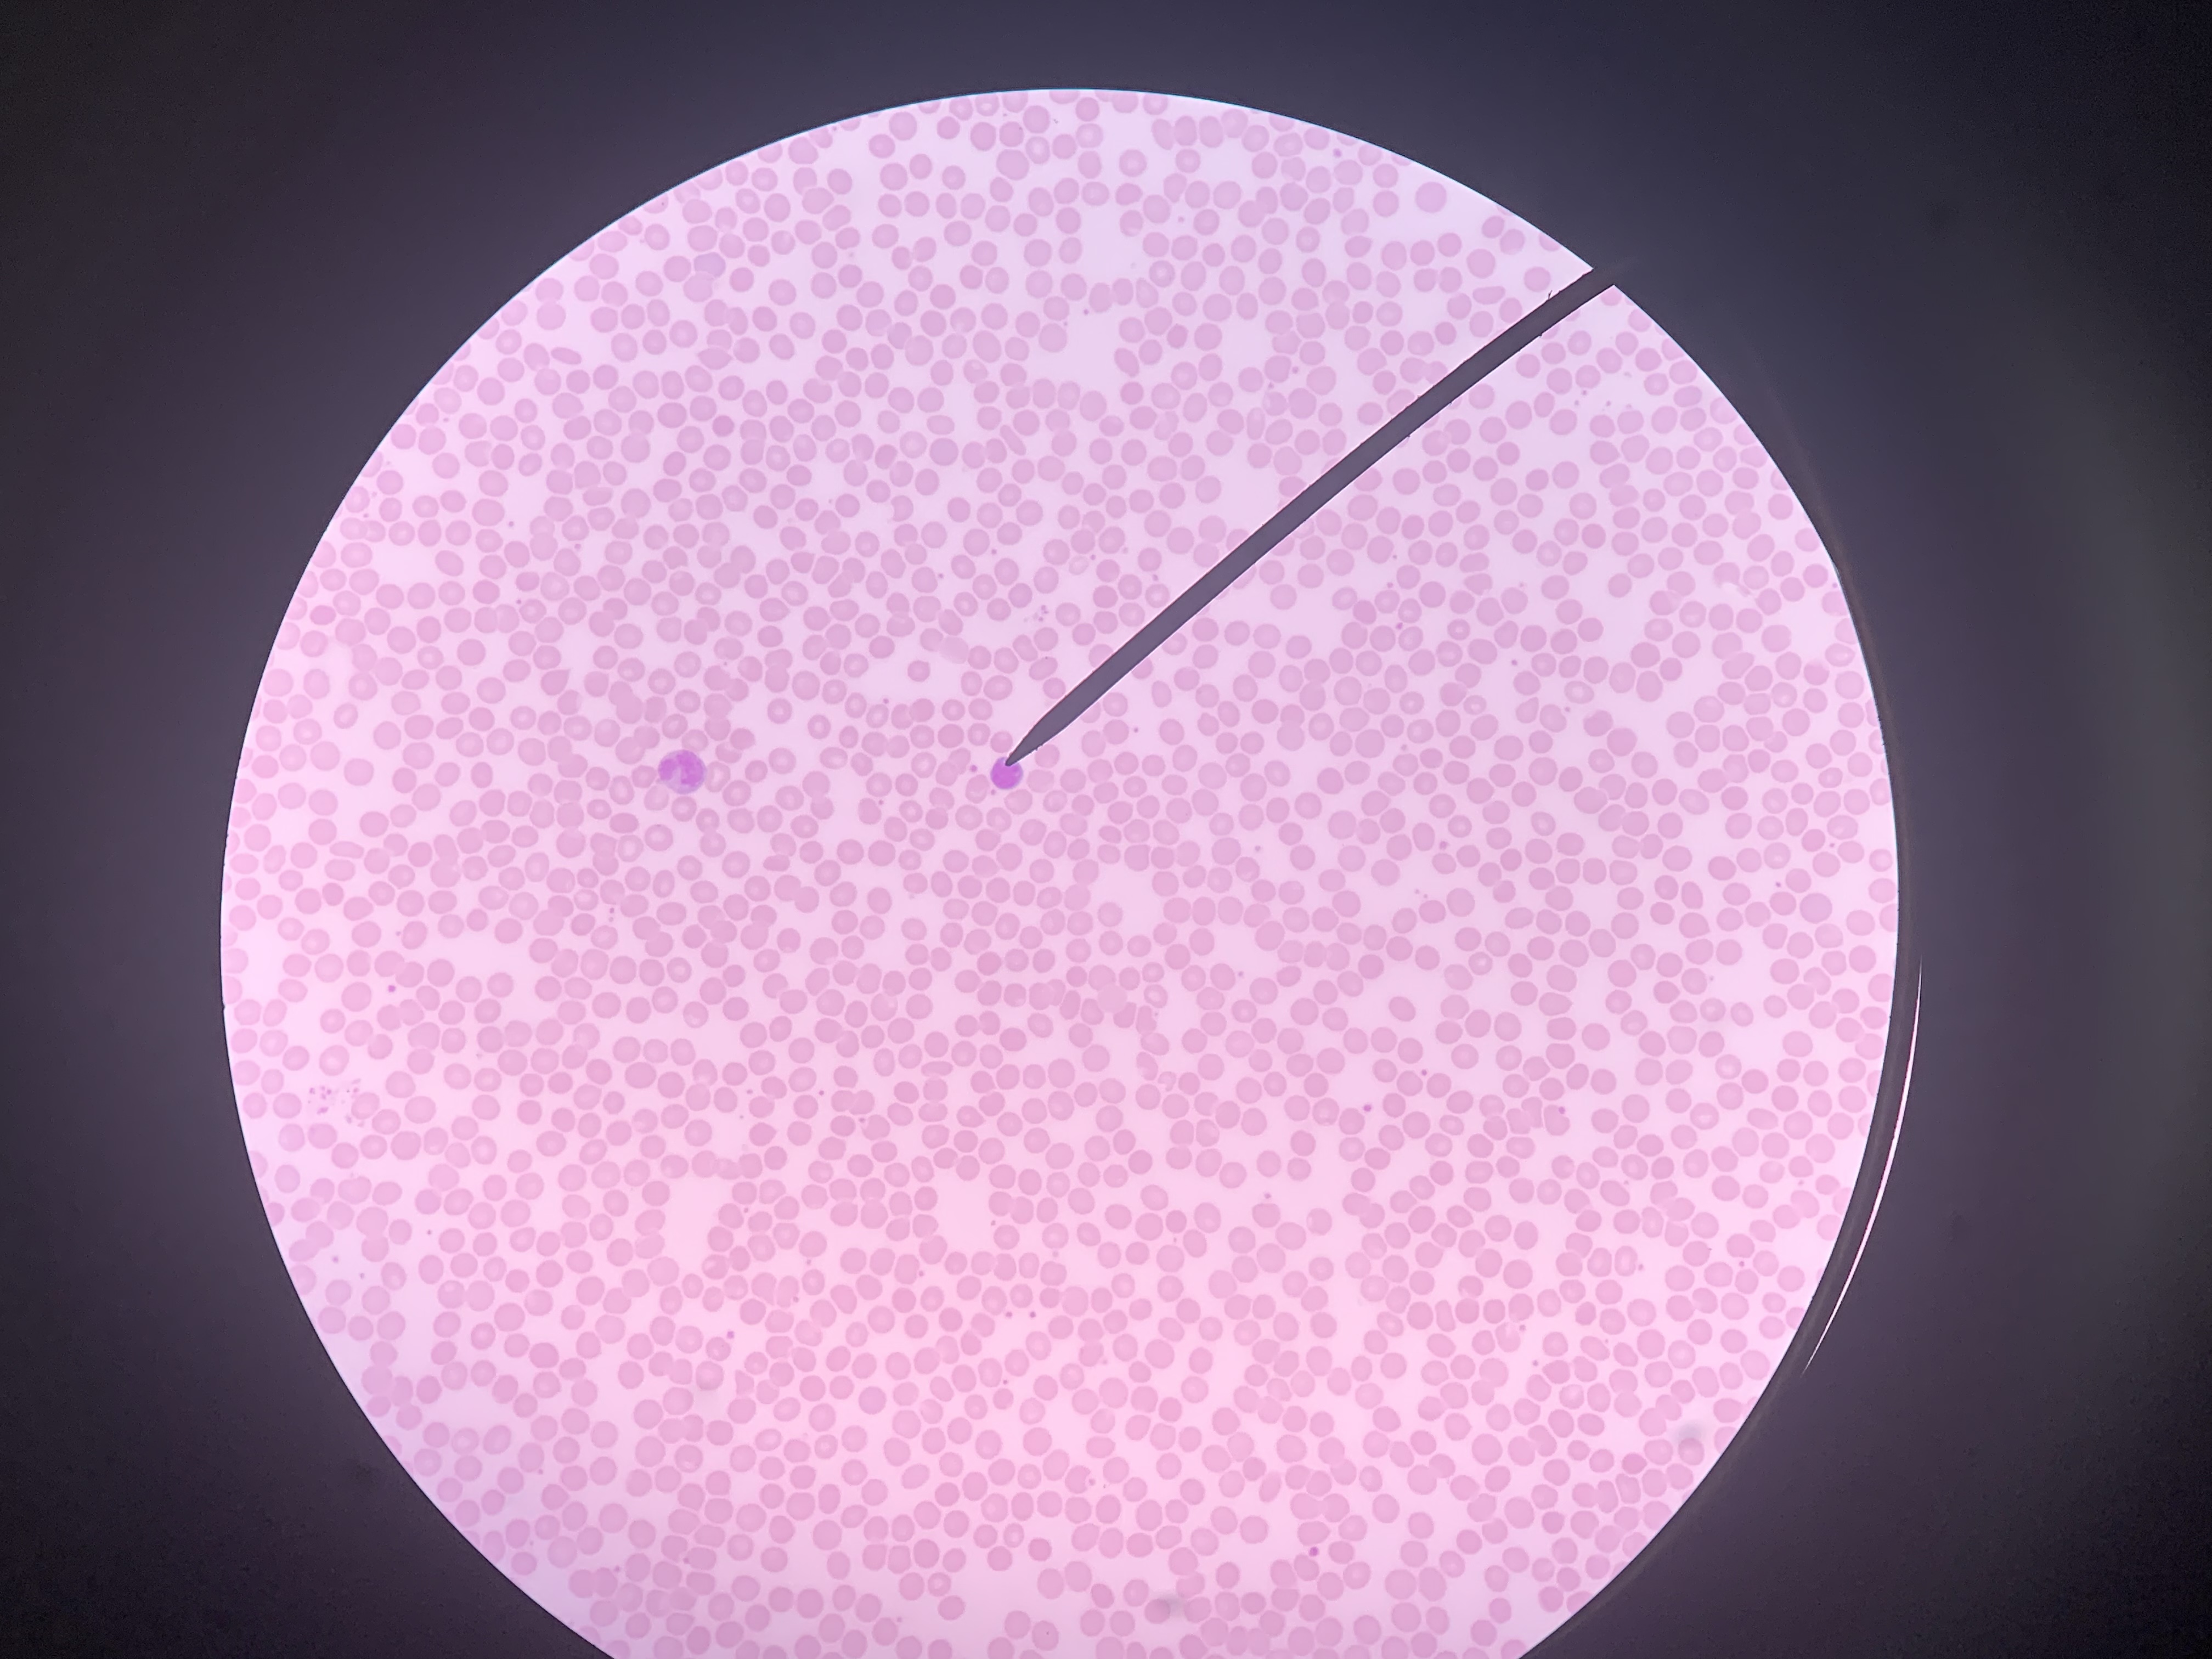 <p>Identify the blood cell at the tip of the pointer:</p>